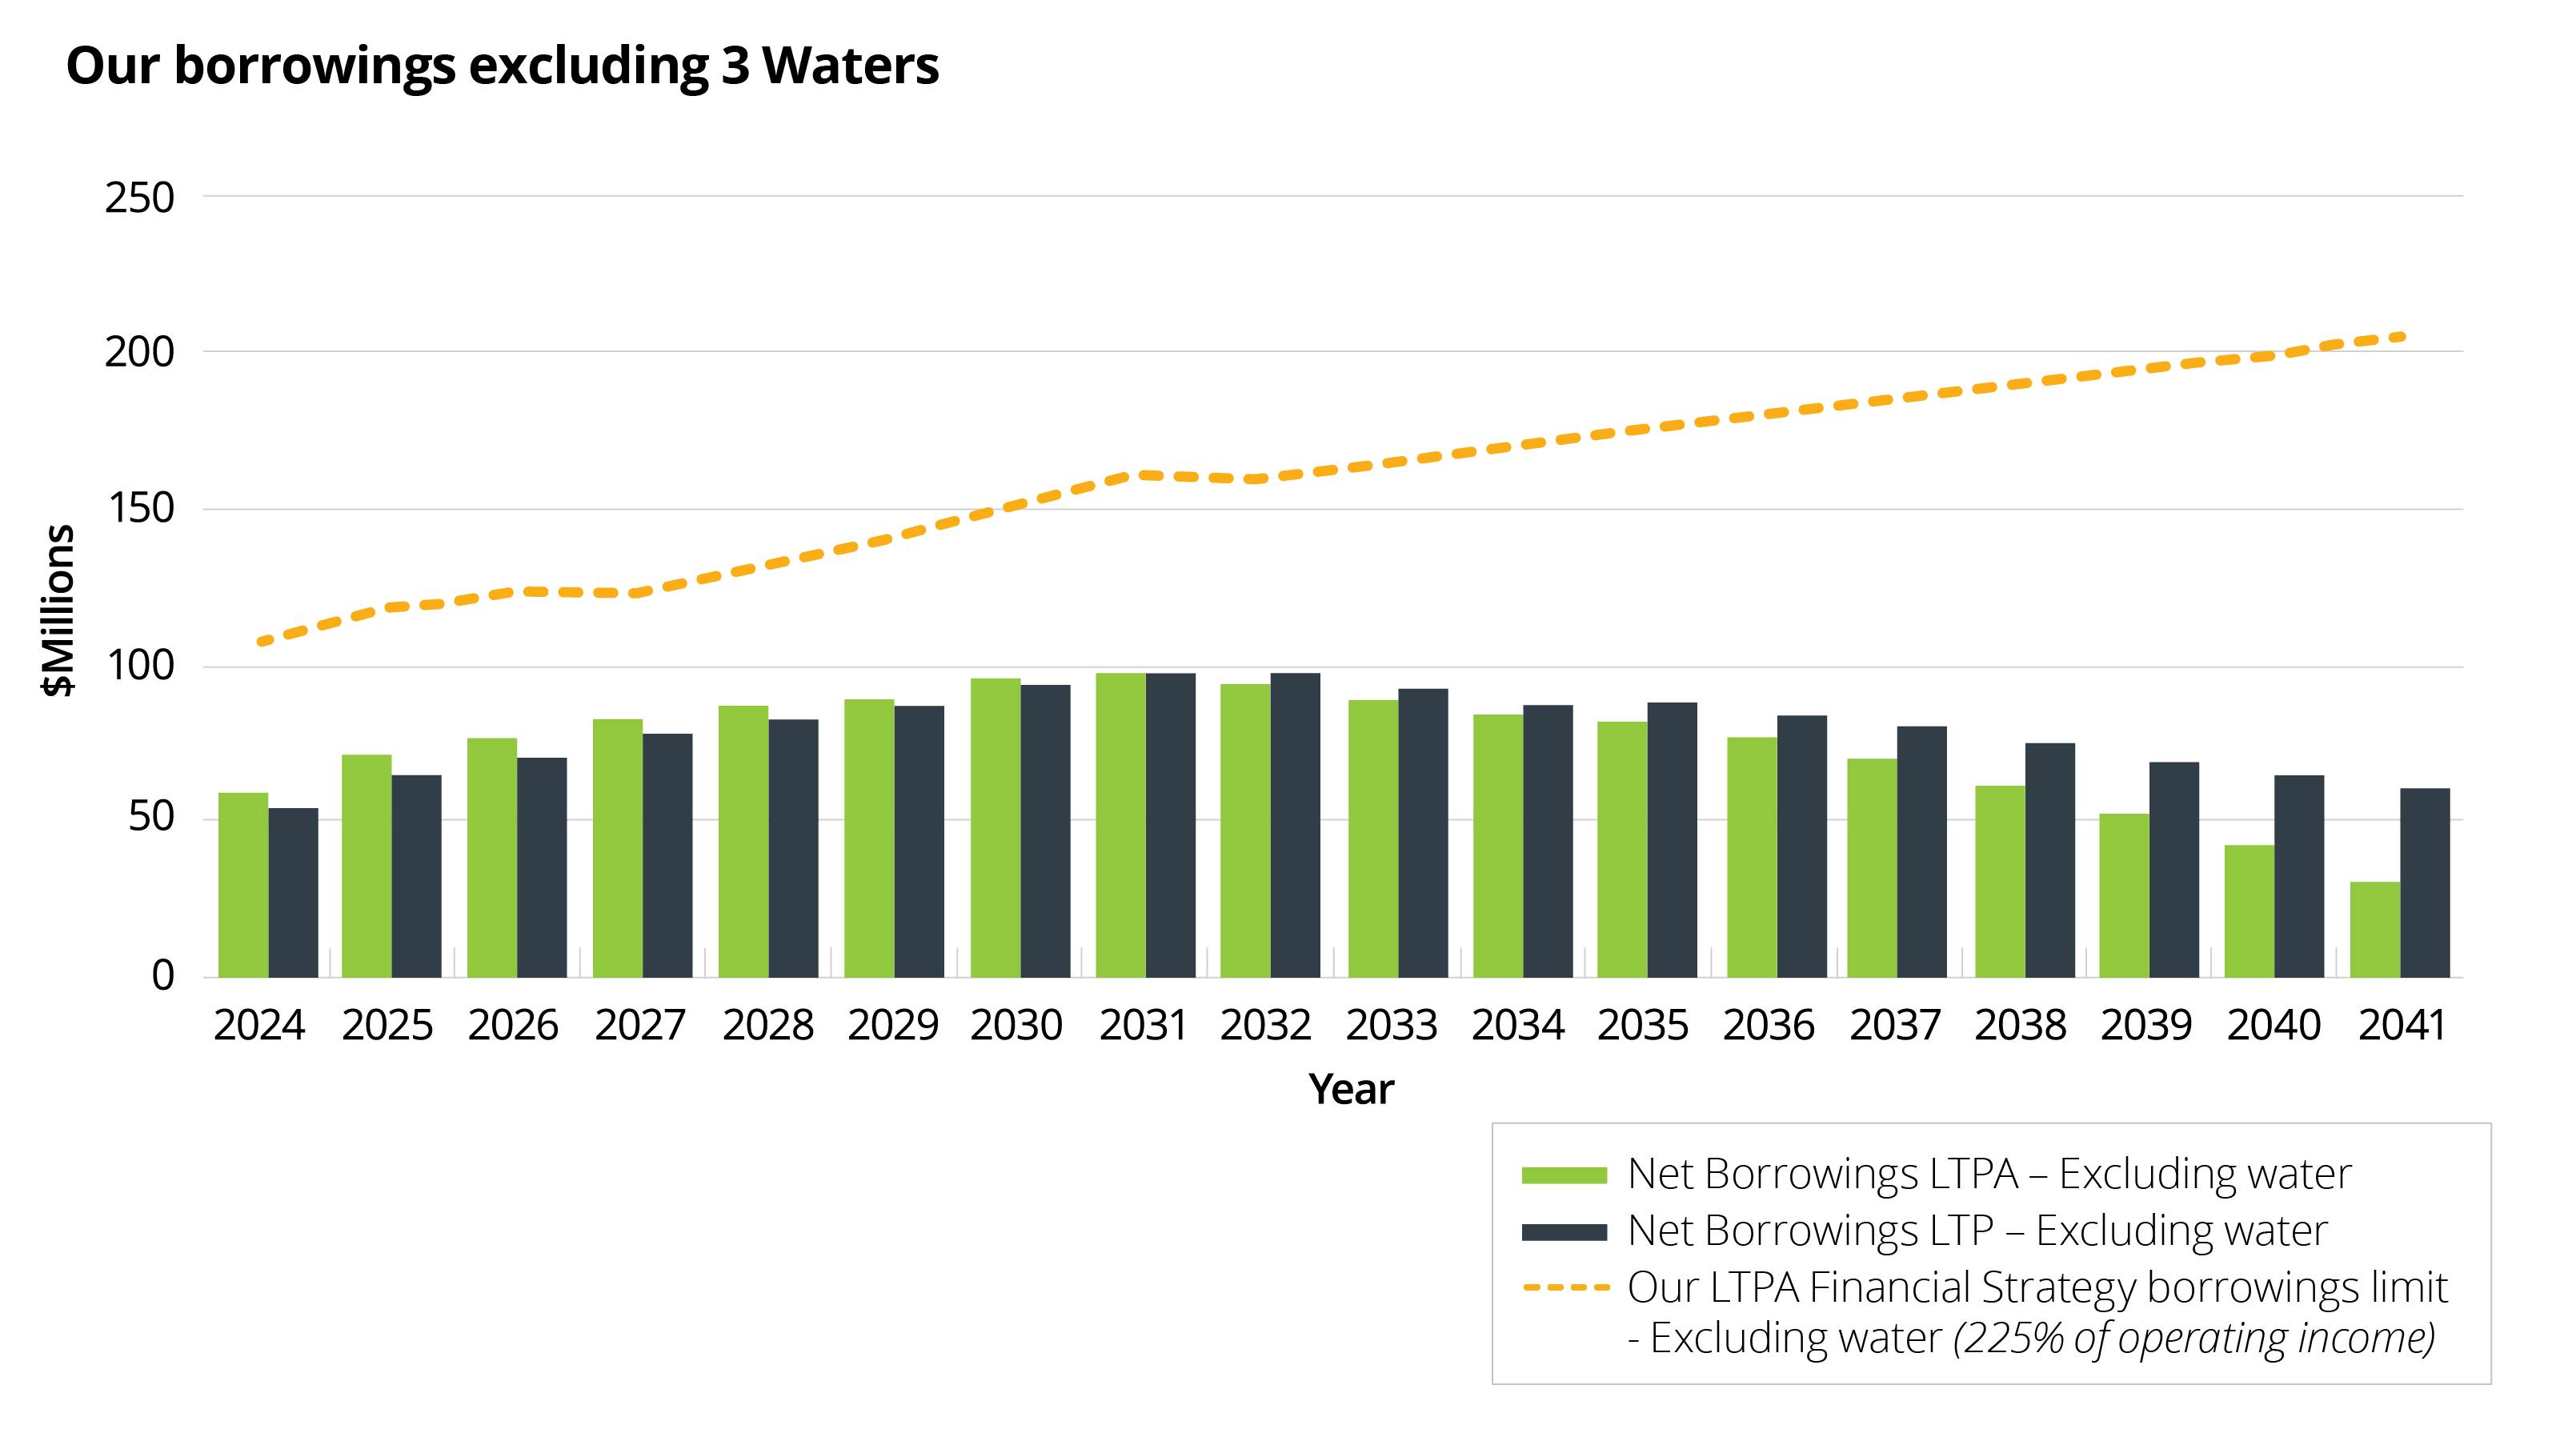 Our borrowings excluding 3 Waters